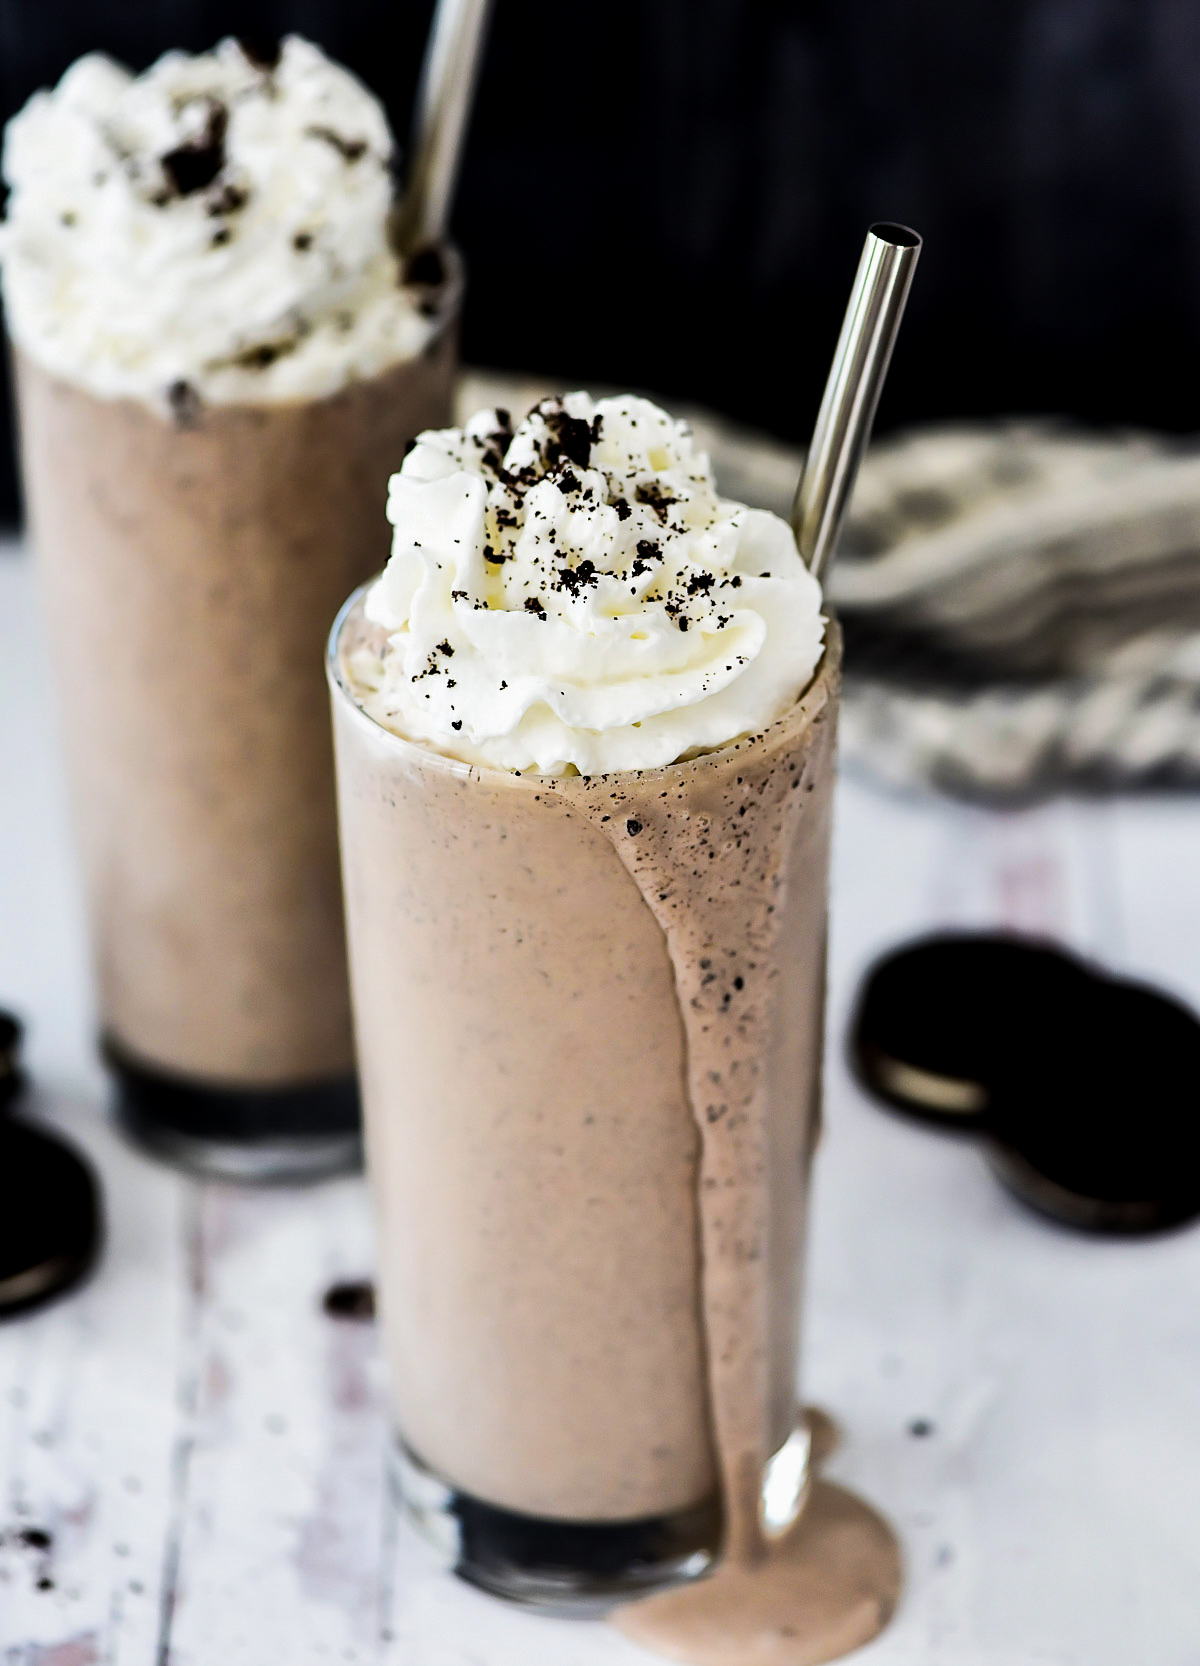 Oreo Chocolate Milkshakes that have fewer calories and fat.